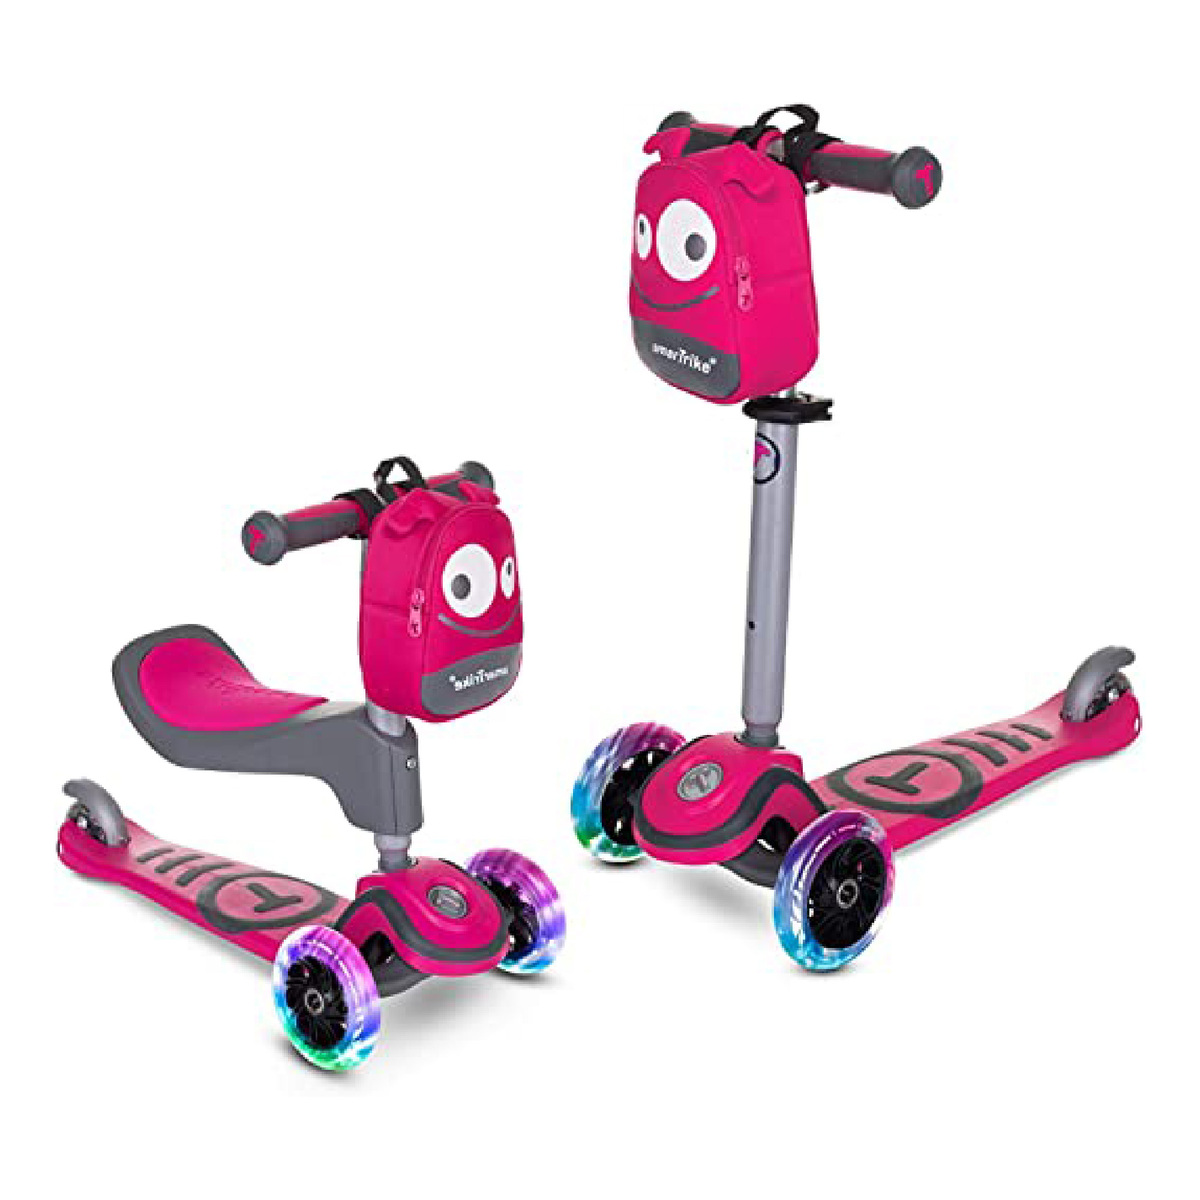 Smart Trike T1 3 Stage 3 Wheel Scooter with Safe Guard, Pink, 2020201